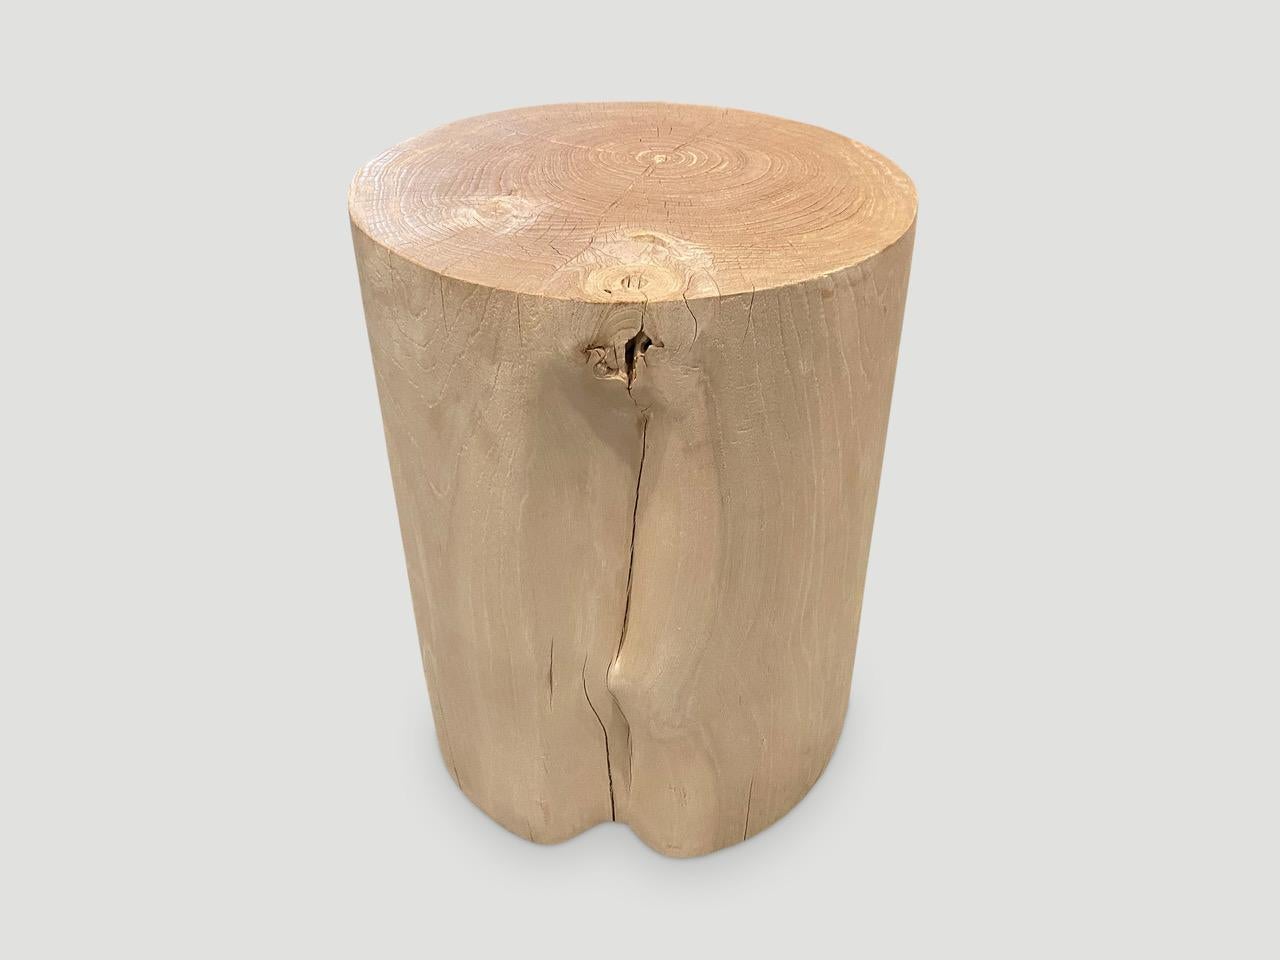 Reclaimed teak wood cylinder side table or stool. Bleached to a bone finish and hand carved into a minimalist cylinder whilst respecting the natural organic wood. Also available charred. Please inquire. We have a collection.

The St. Barts